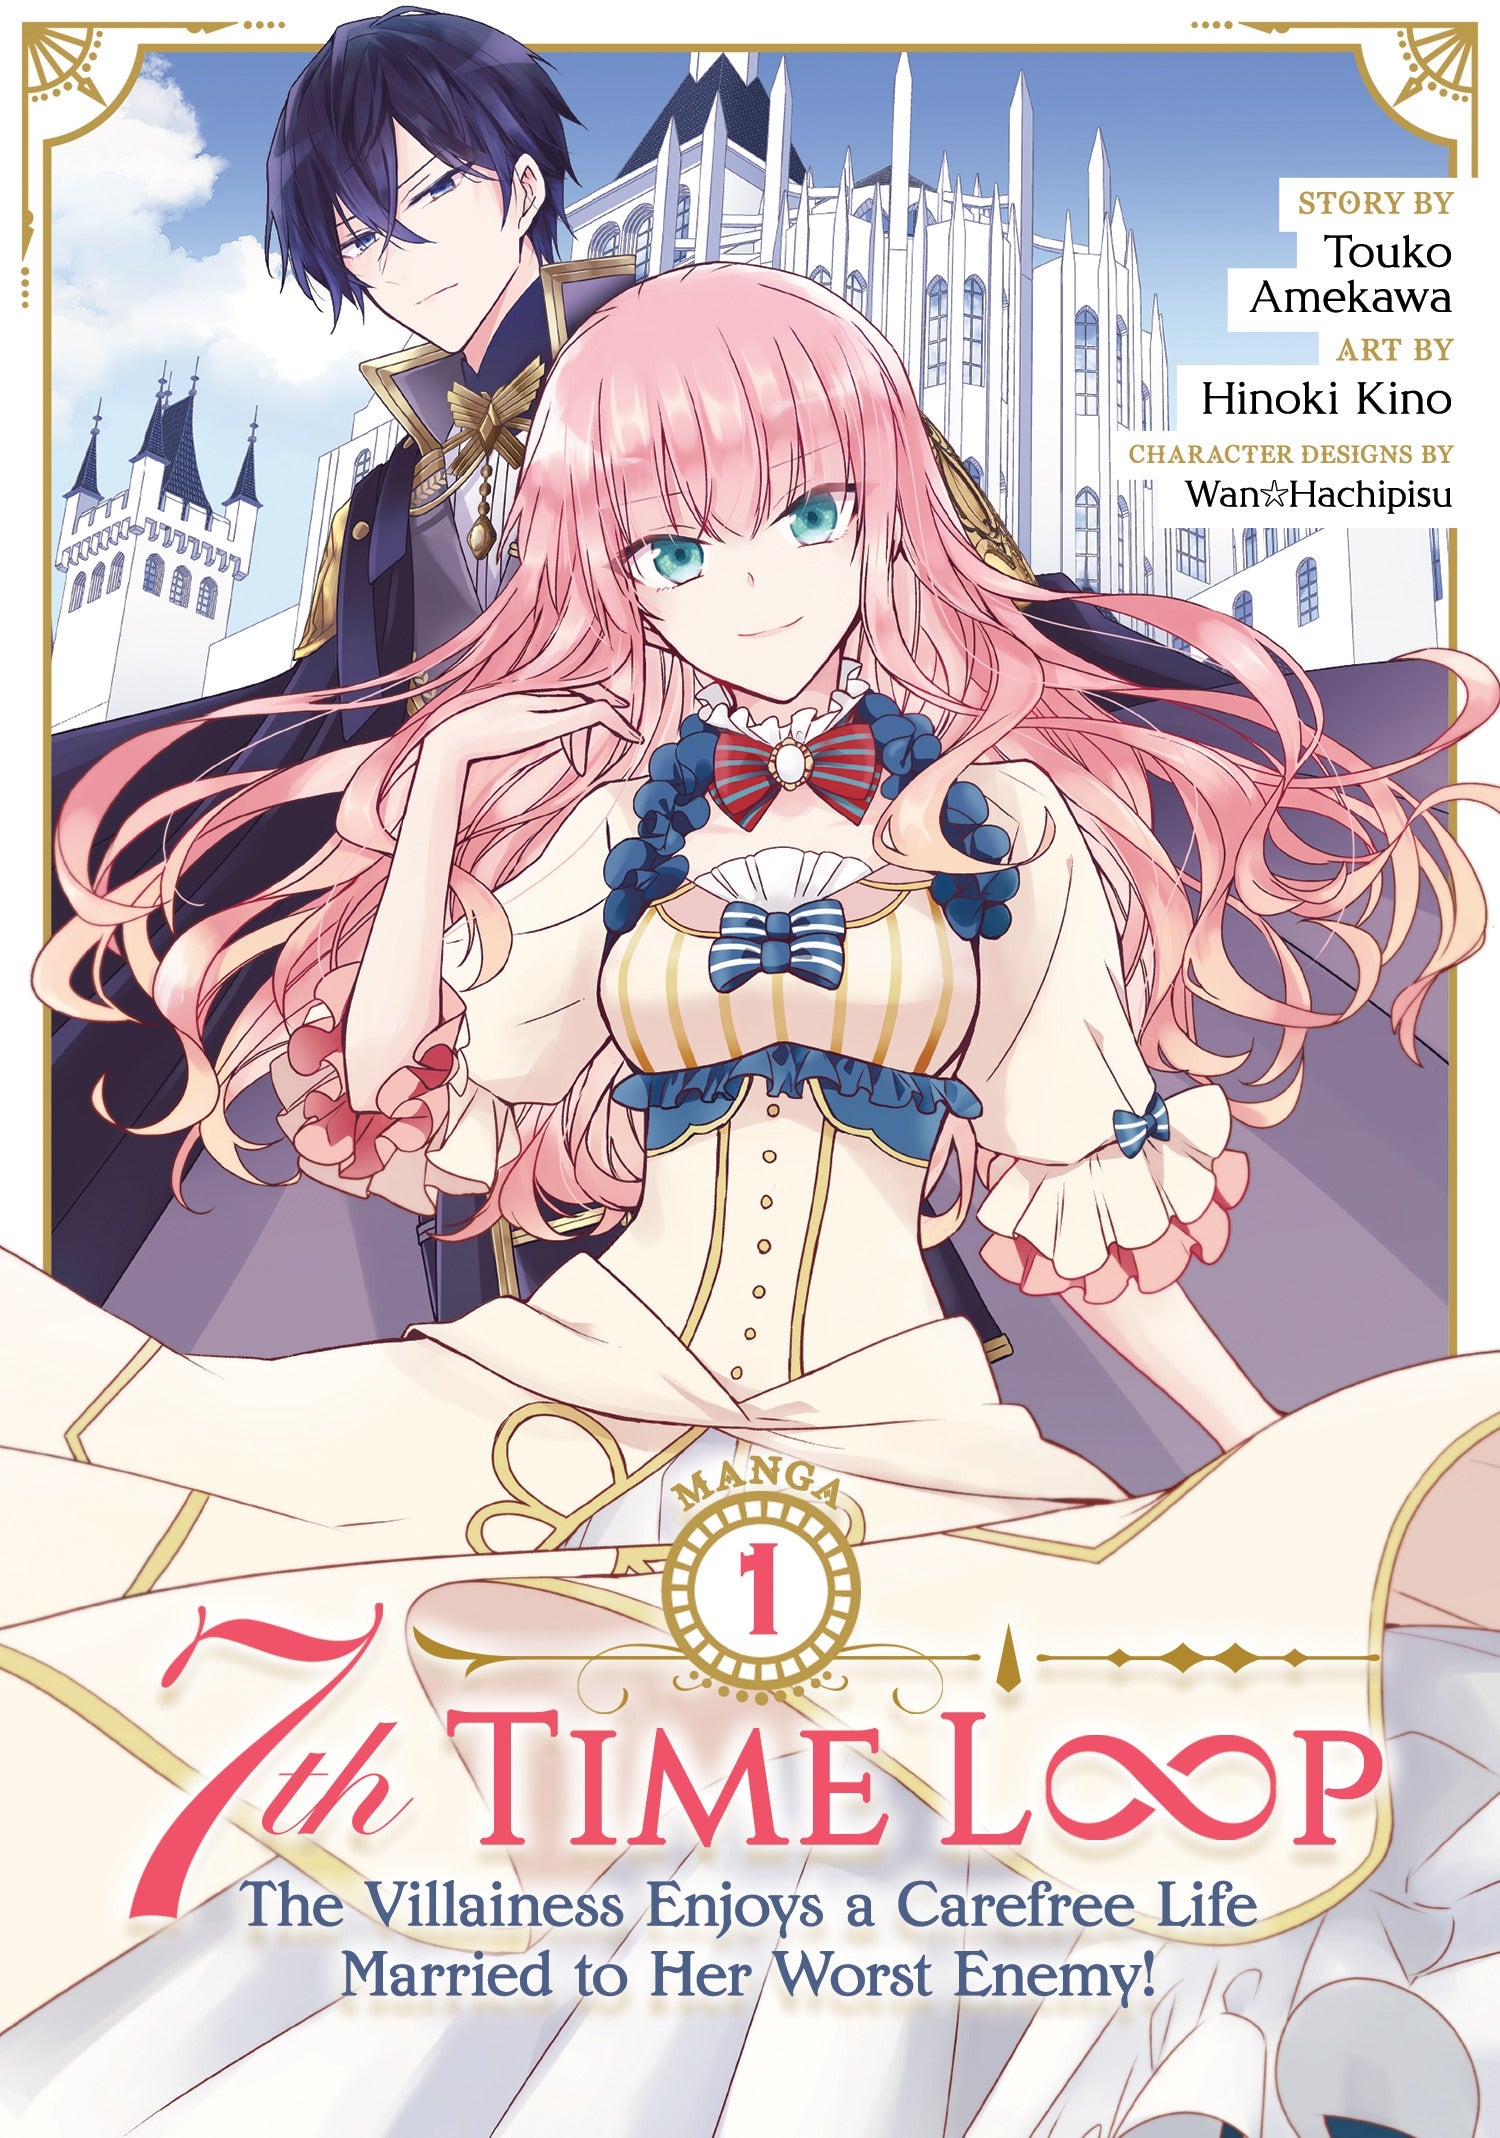 7th Time Loop The Villainess Enjoys a Carefree Life Married to Her Worst Enemy! (Manga) Vol. 1